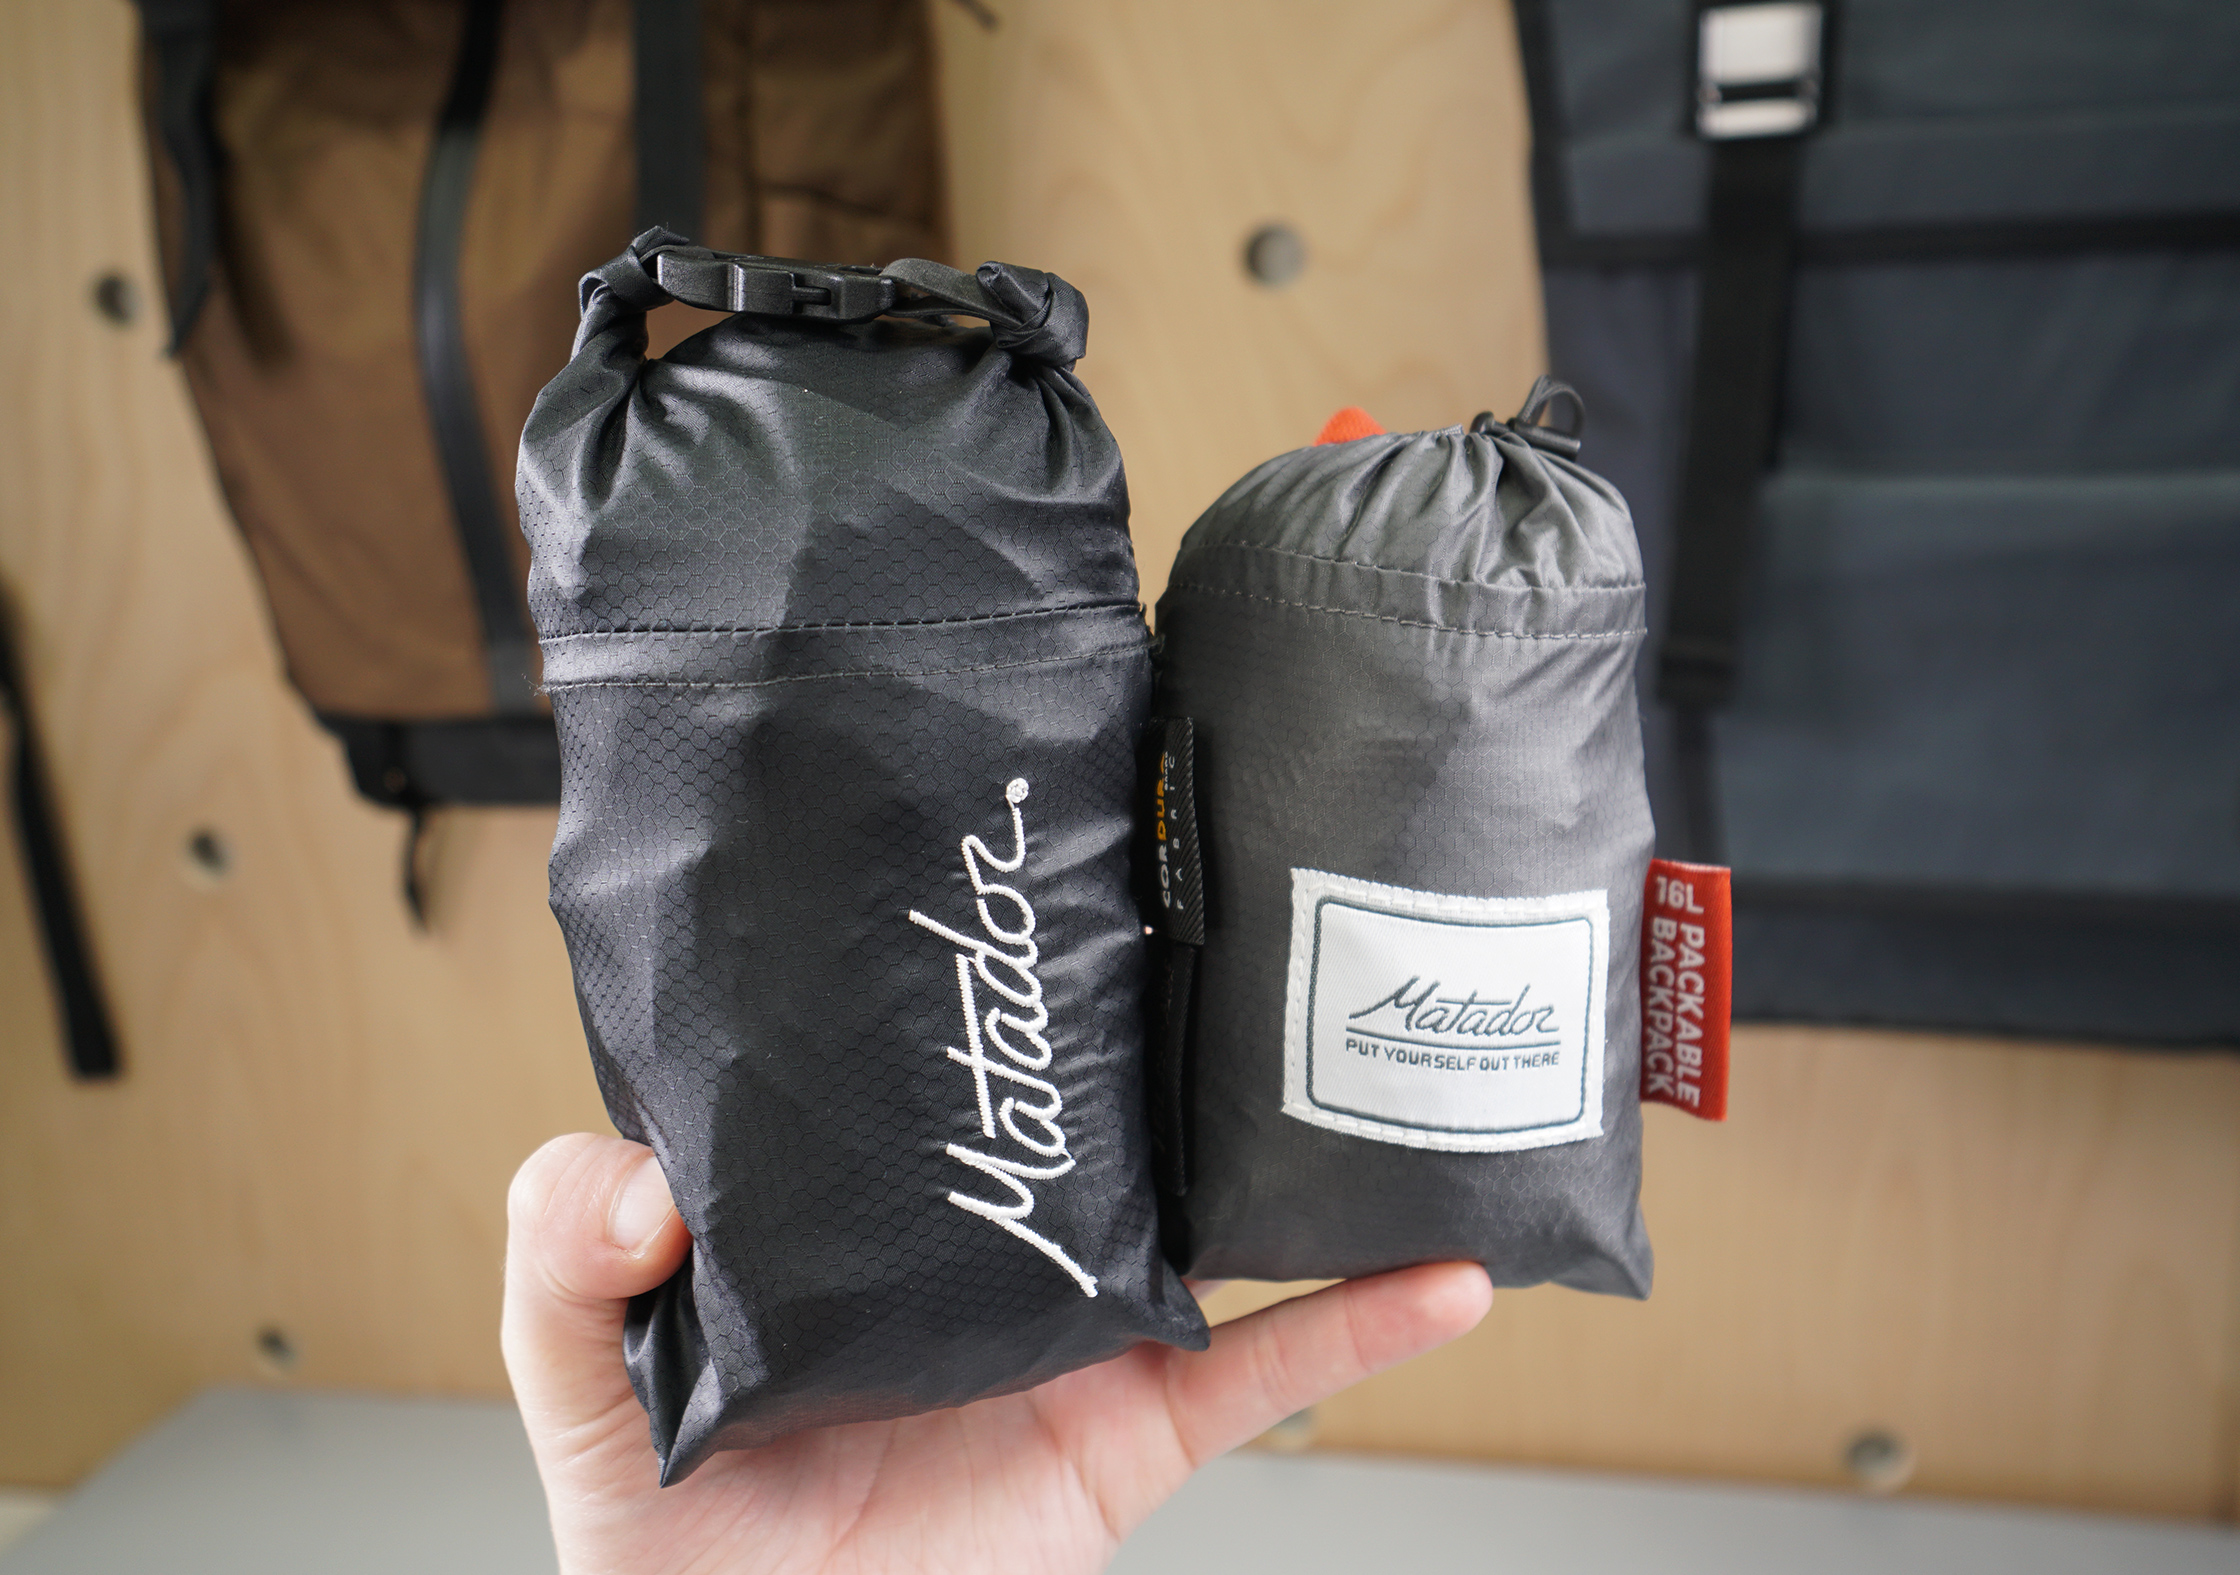 Matador Freefly16 Daypack   (Left) Compared To The Matador Daylite16 (Right)